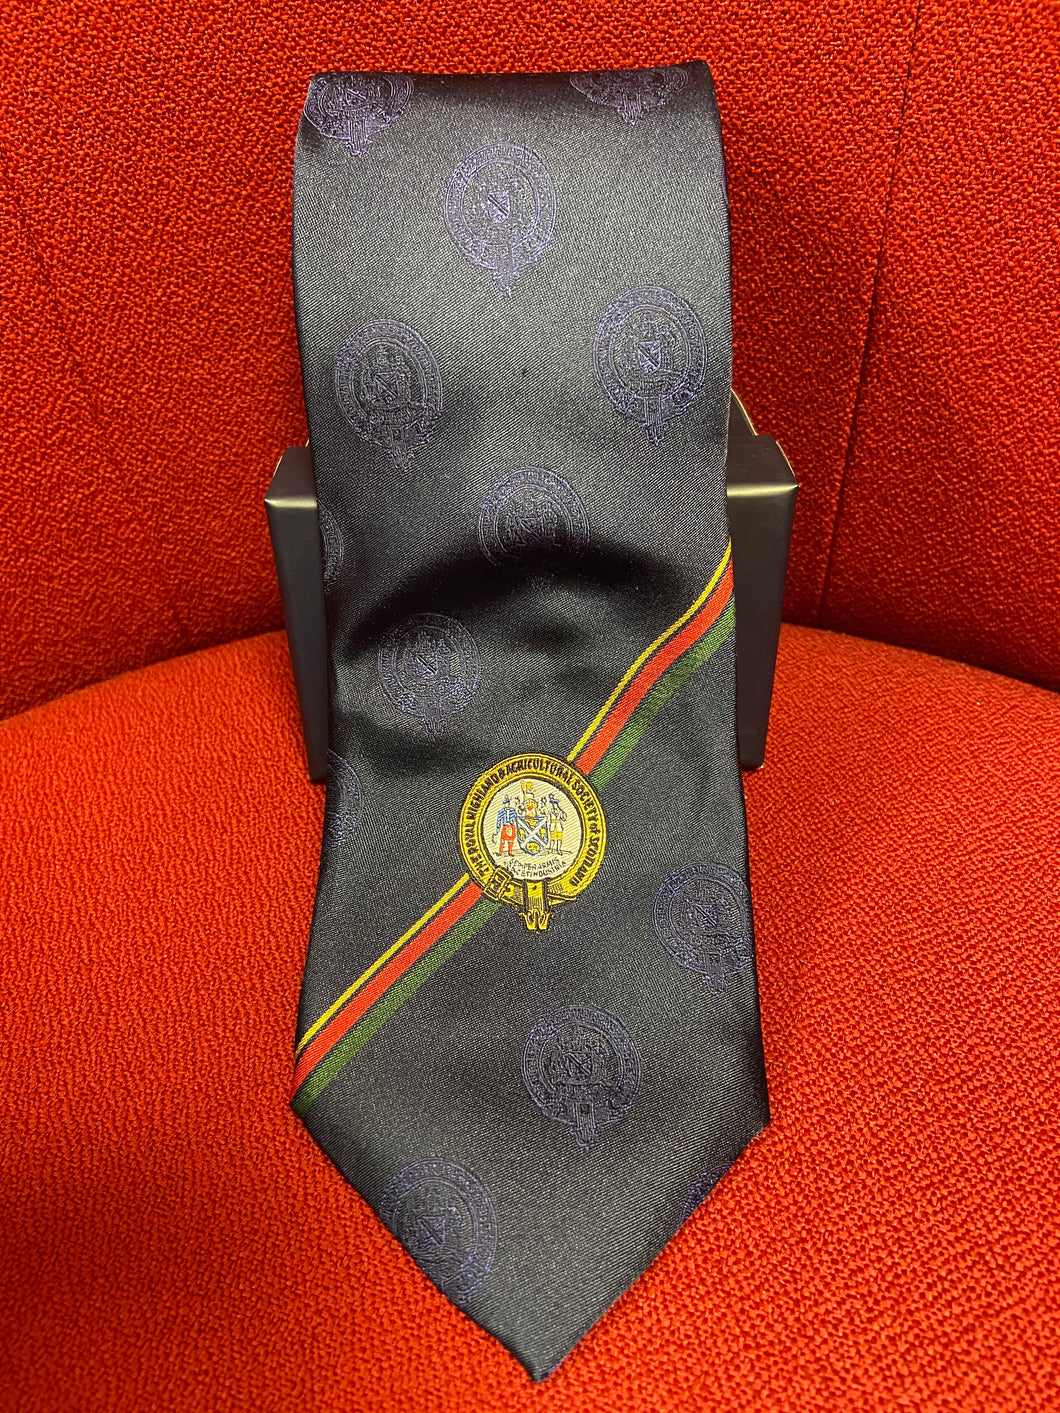 The Royal Highland & Agricultural Society of Scotland Commemorative Bicentennial Neck Tie